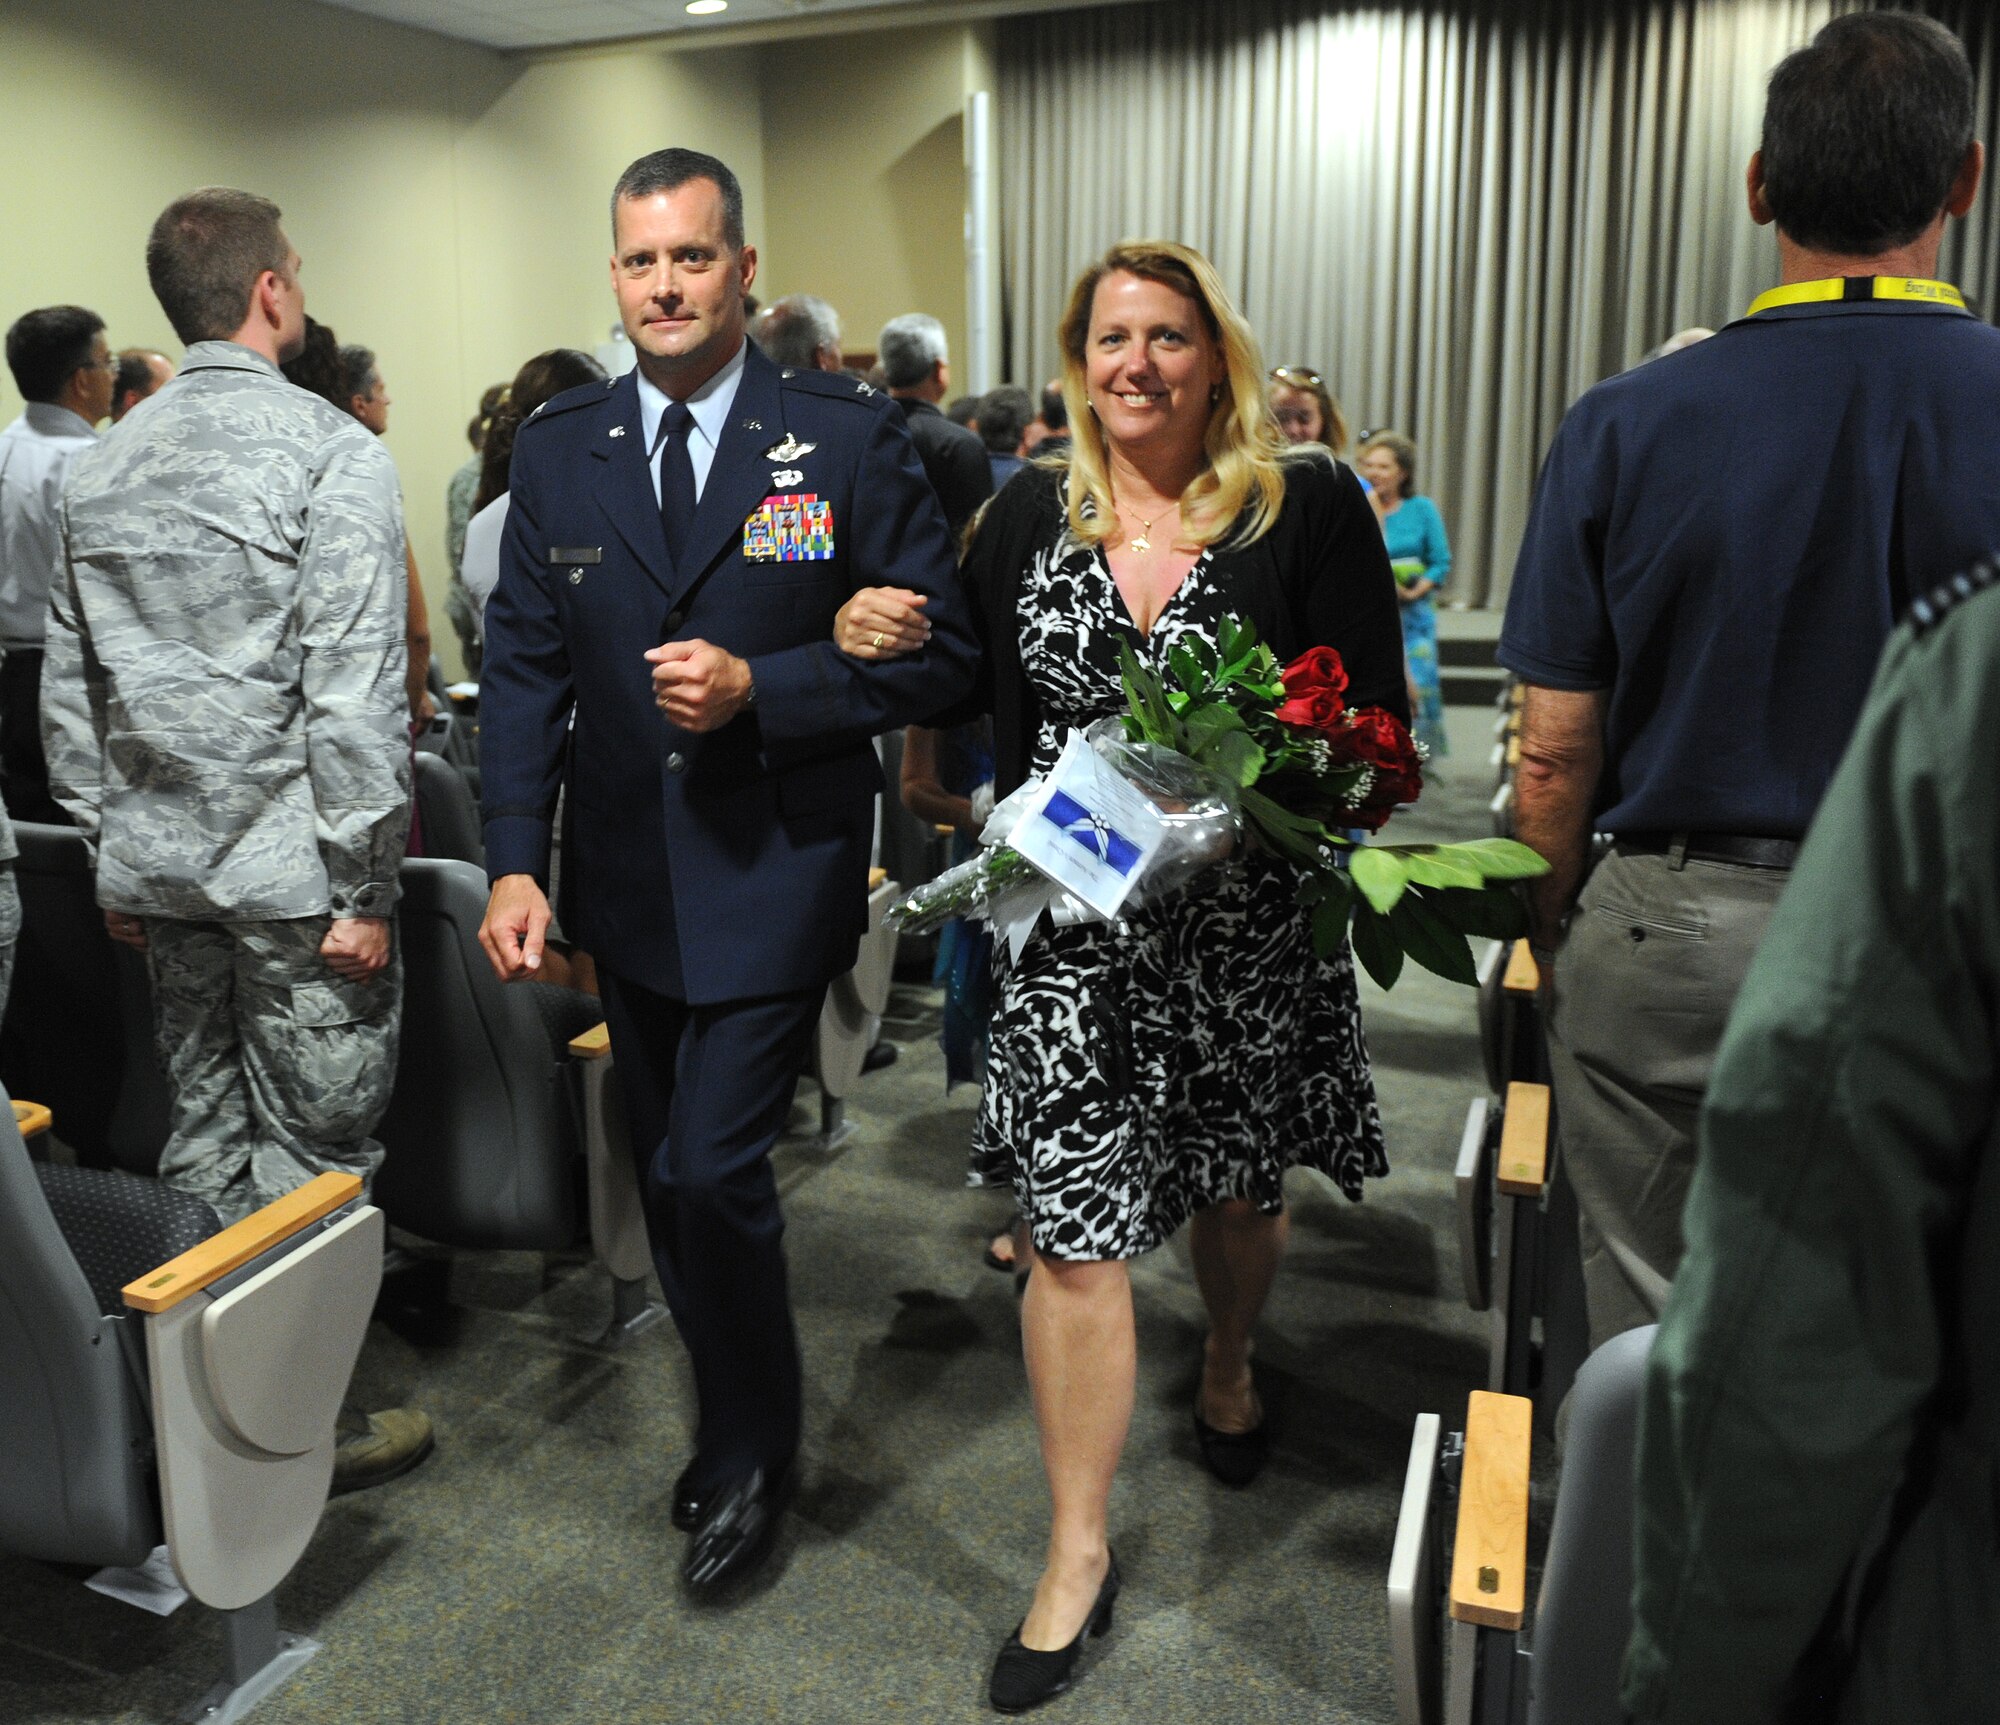 Col. Daniel Orcutt, commander of the 505th Command and Control Wing, and his wife depart the 505th CCW change of command ceremony on Hurlburt Field, Fla., July 9, 2013. Outgoing commander Col. Mustafa Koprucu passed command of the 505th CCW to Orcutt during the ceremony.